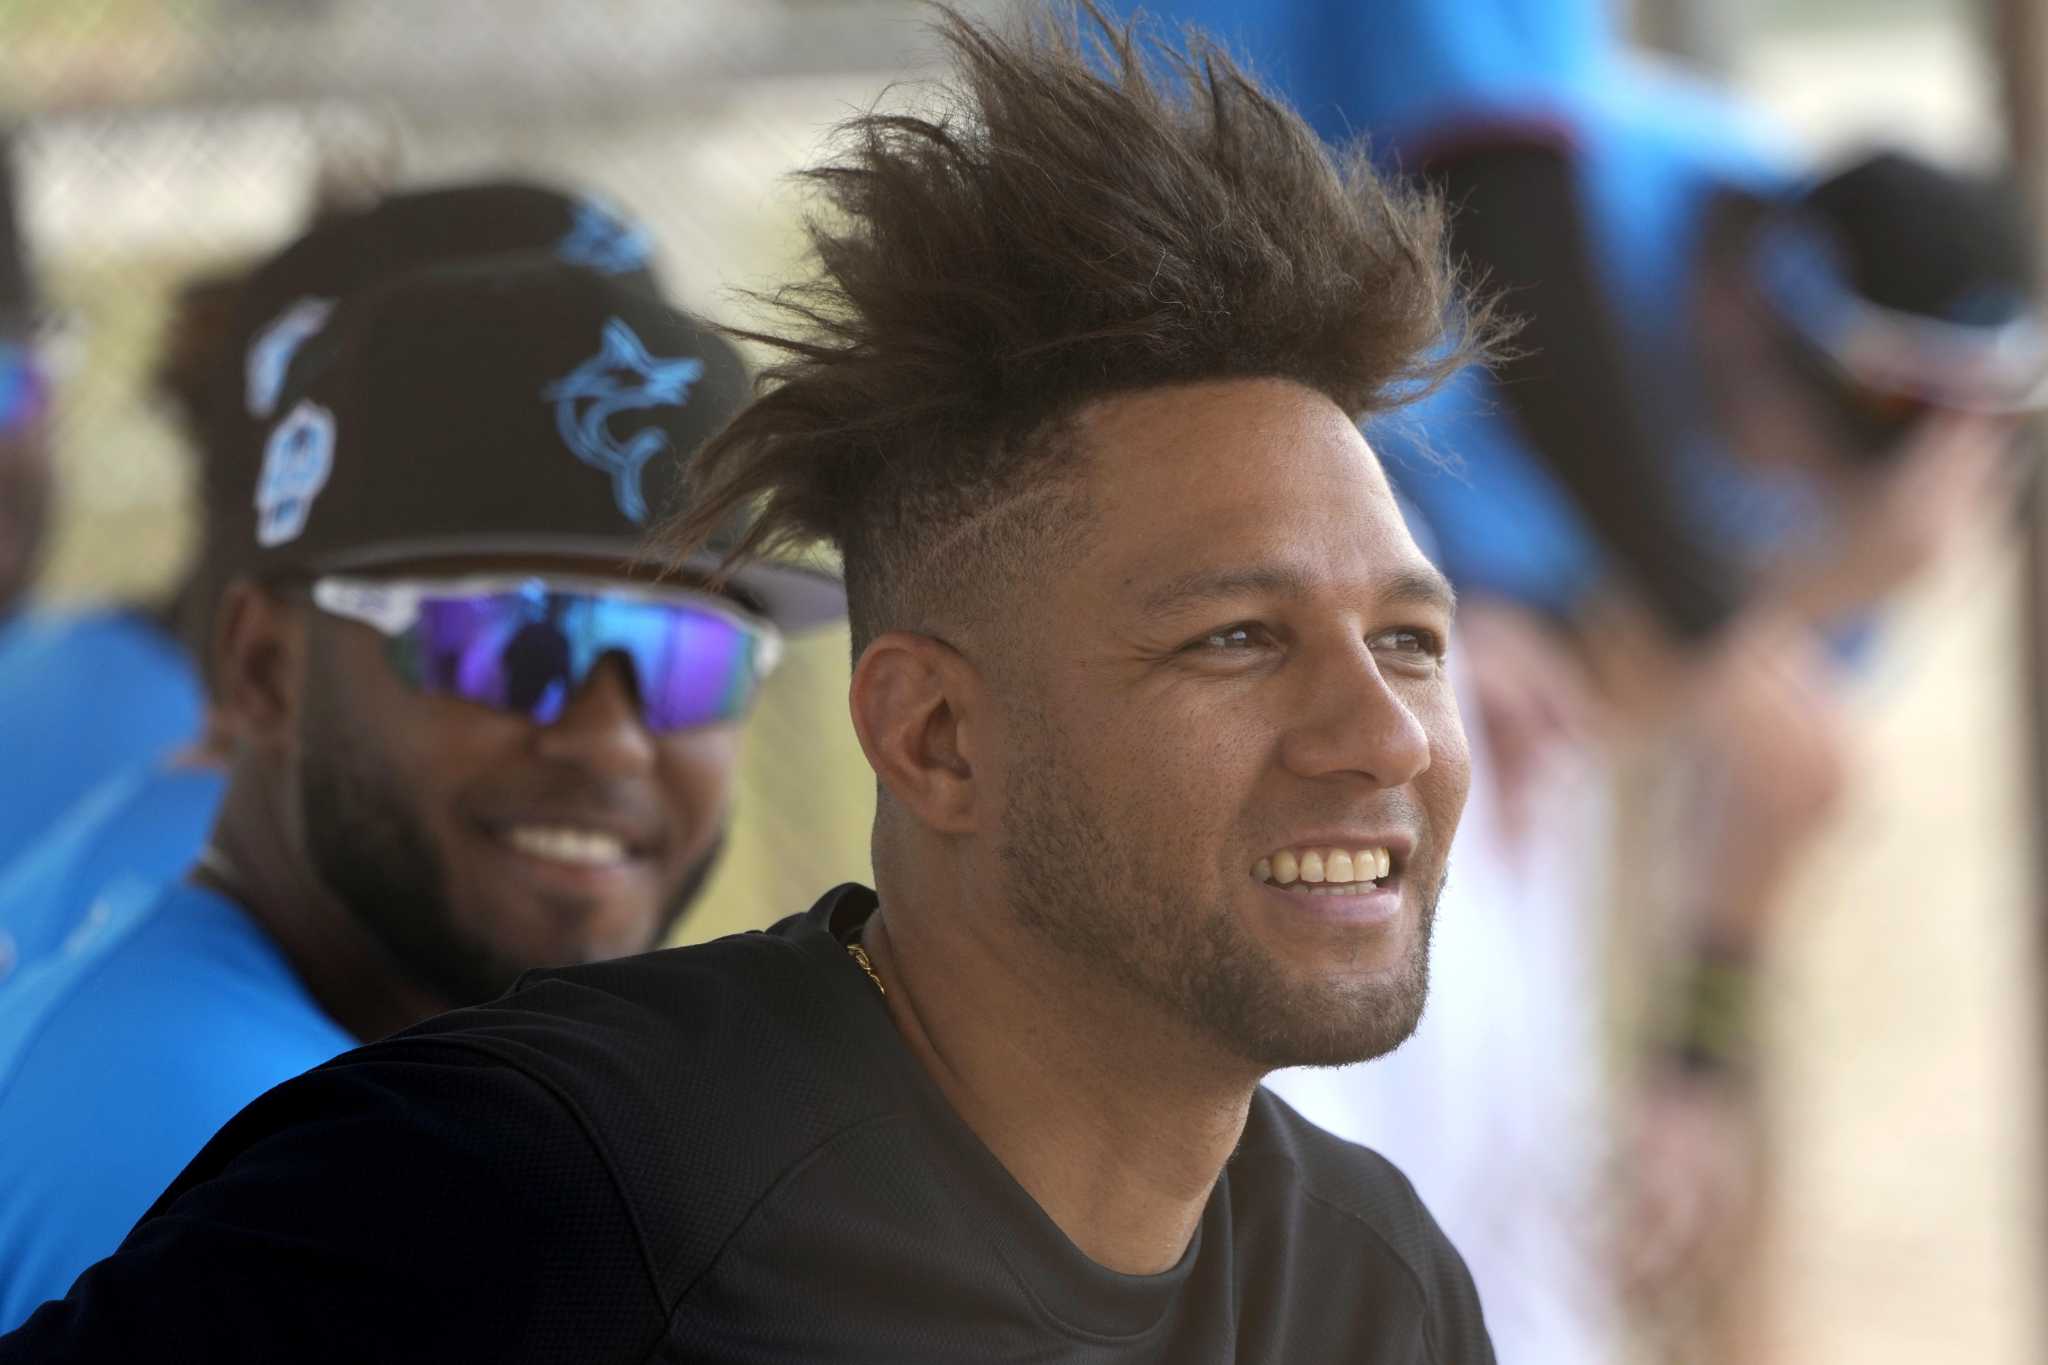 Yuli Gurriel's Instagram farewell message to Astros: 'We are familia